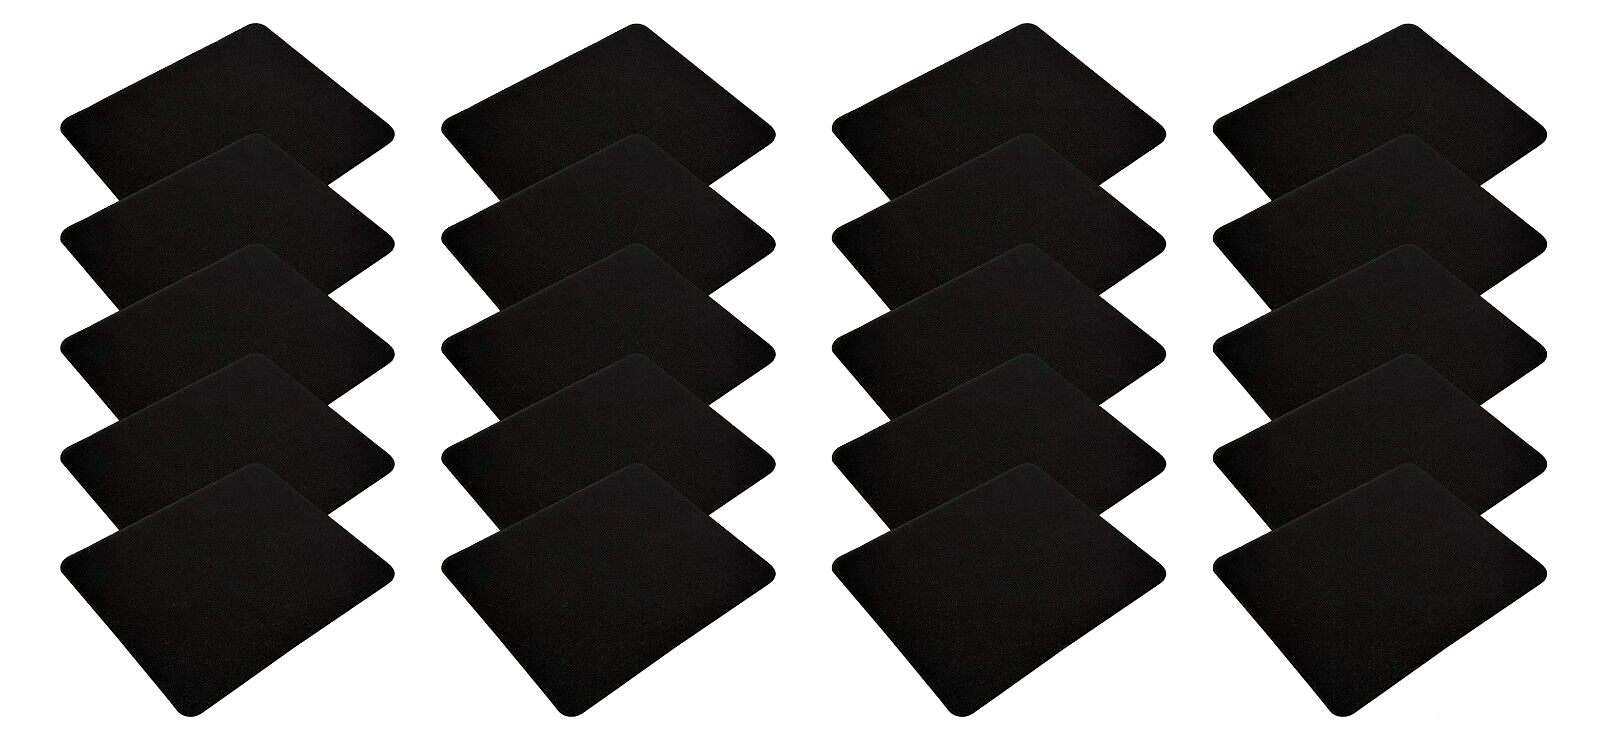 Lot of 20 High Quality 22 x 18cm Black Mousepads No Logo Generic Does Not Apply